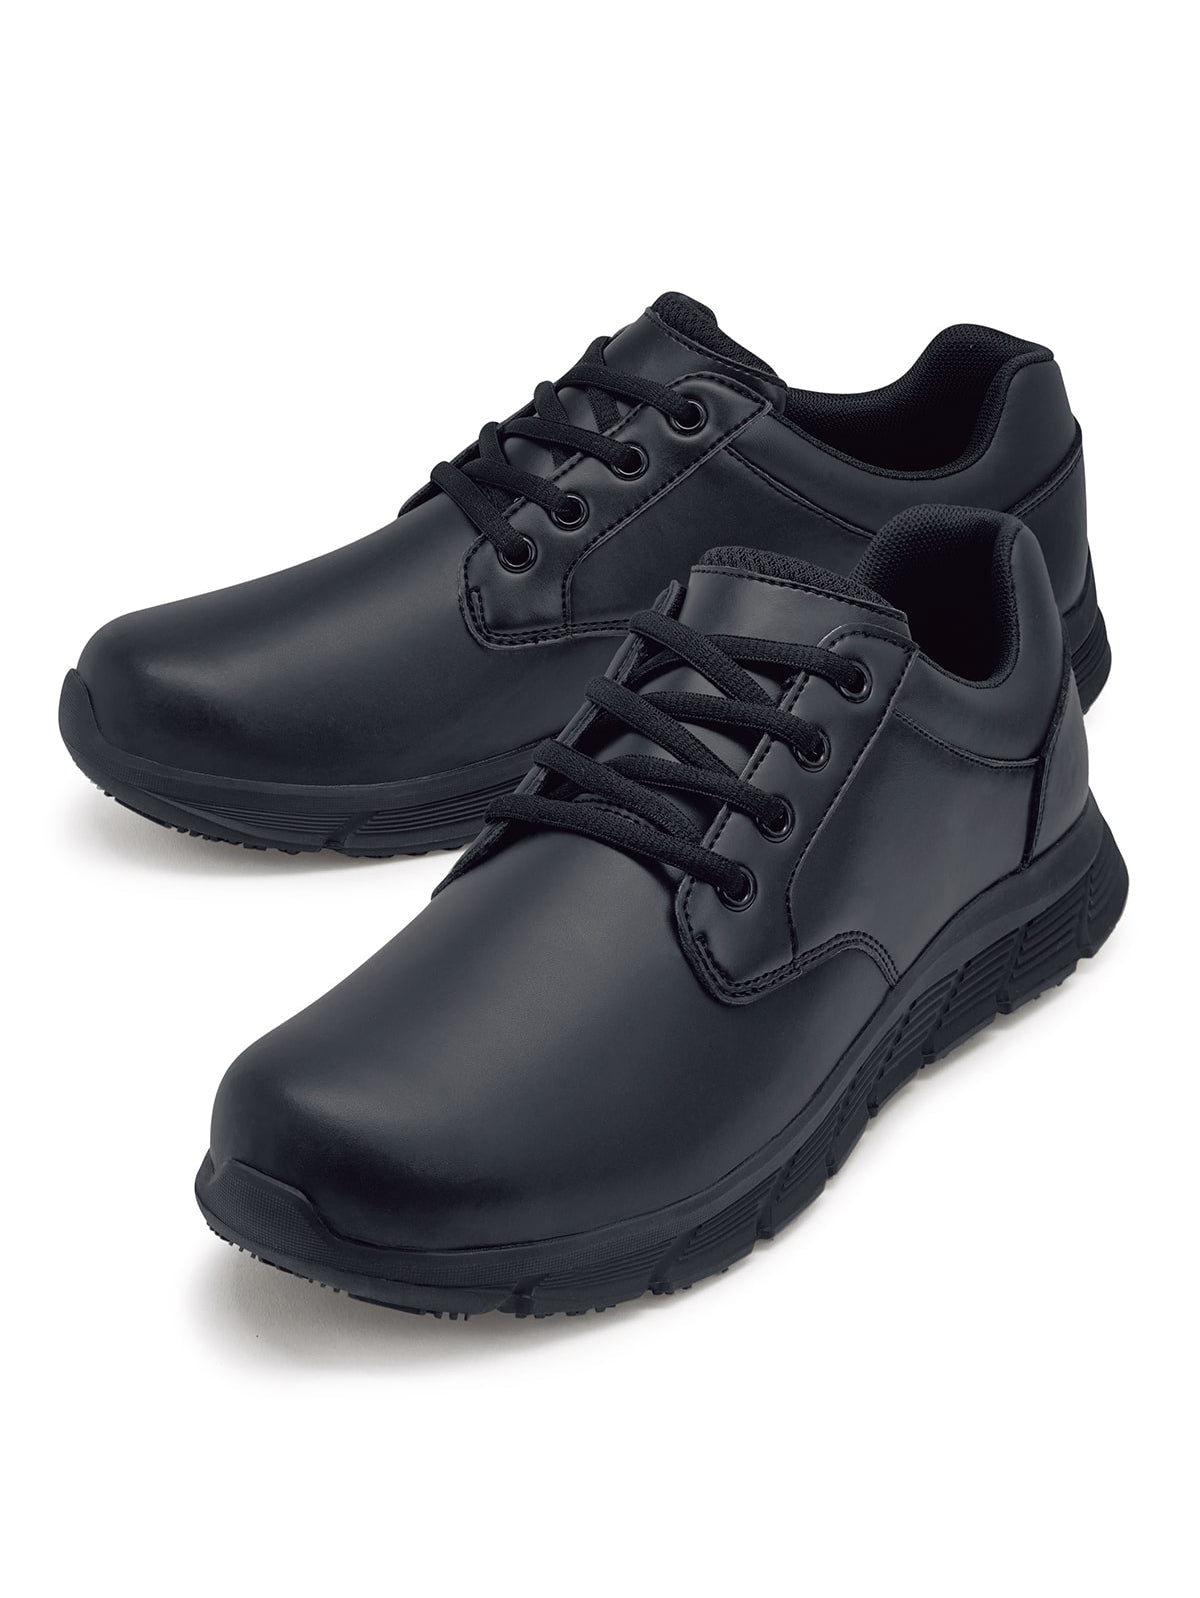 Men's Work Shoes Saloon II by Shoes For Crews -  ChefsCotton